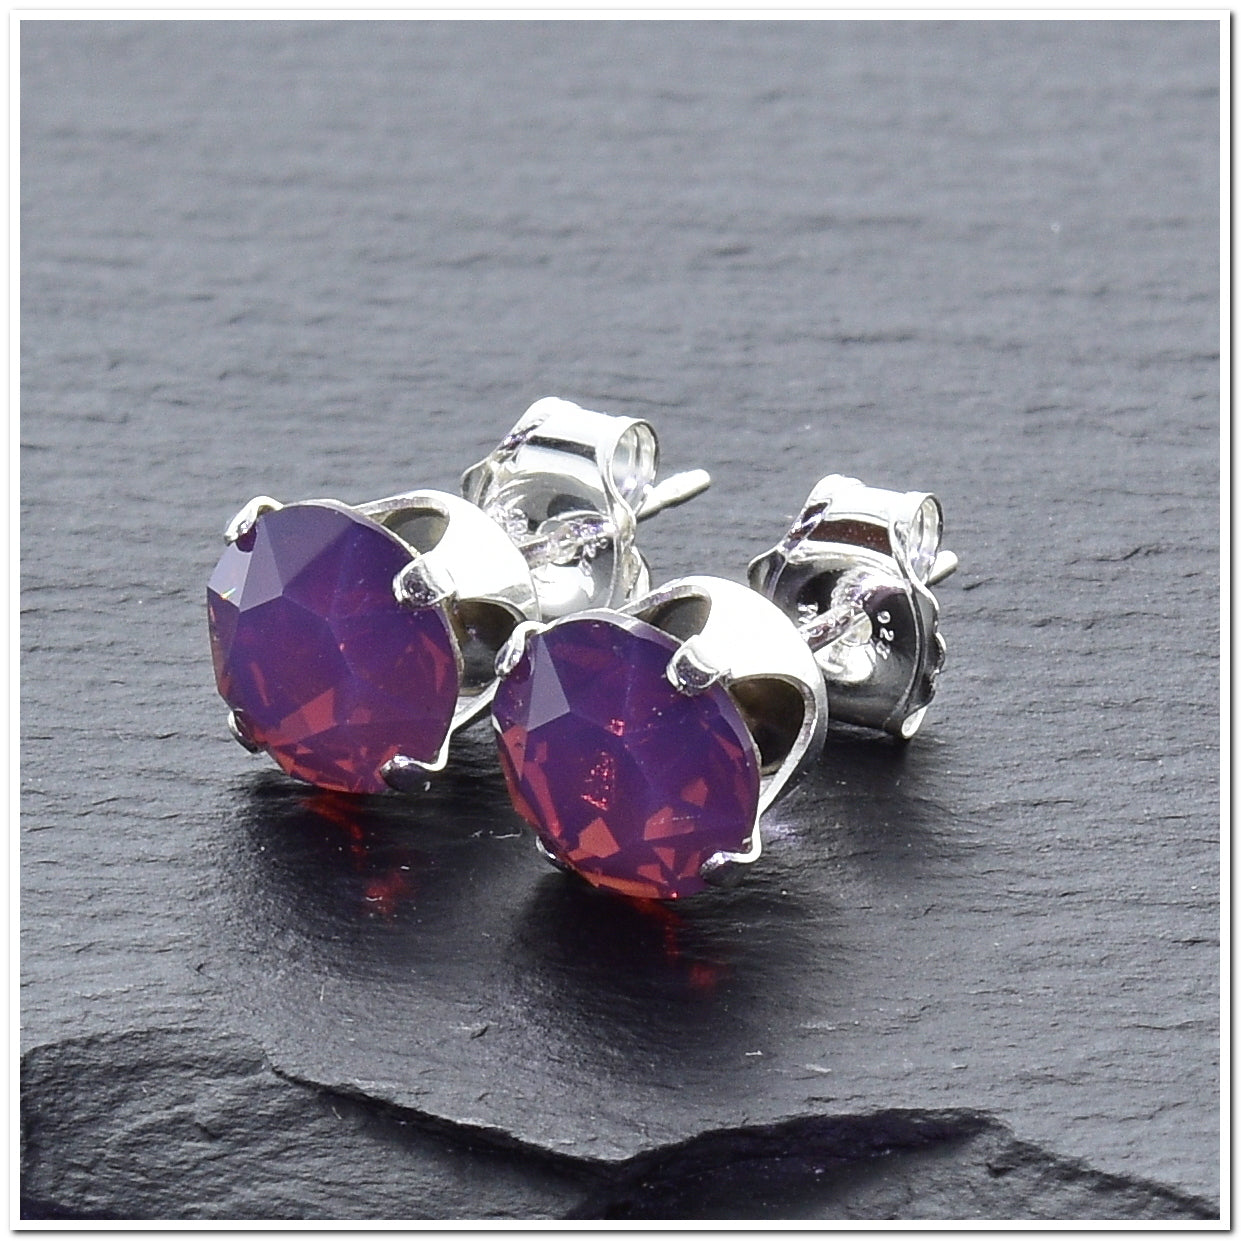 pewterhooter® Women's Classic Collection 925 Sterling silver earrings with sparkling Cyclamen Opal crystals, packaged in a gift box for any occasion.